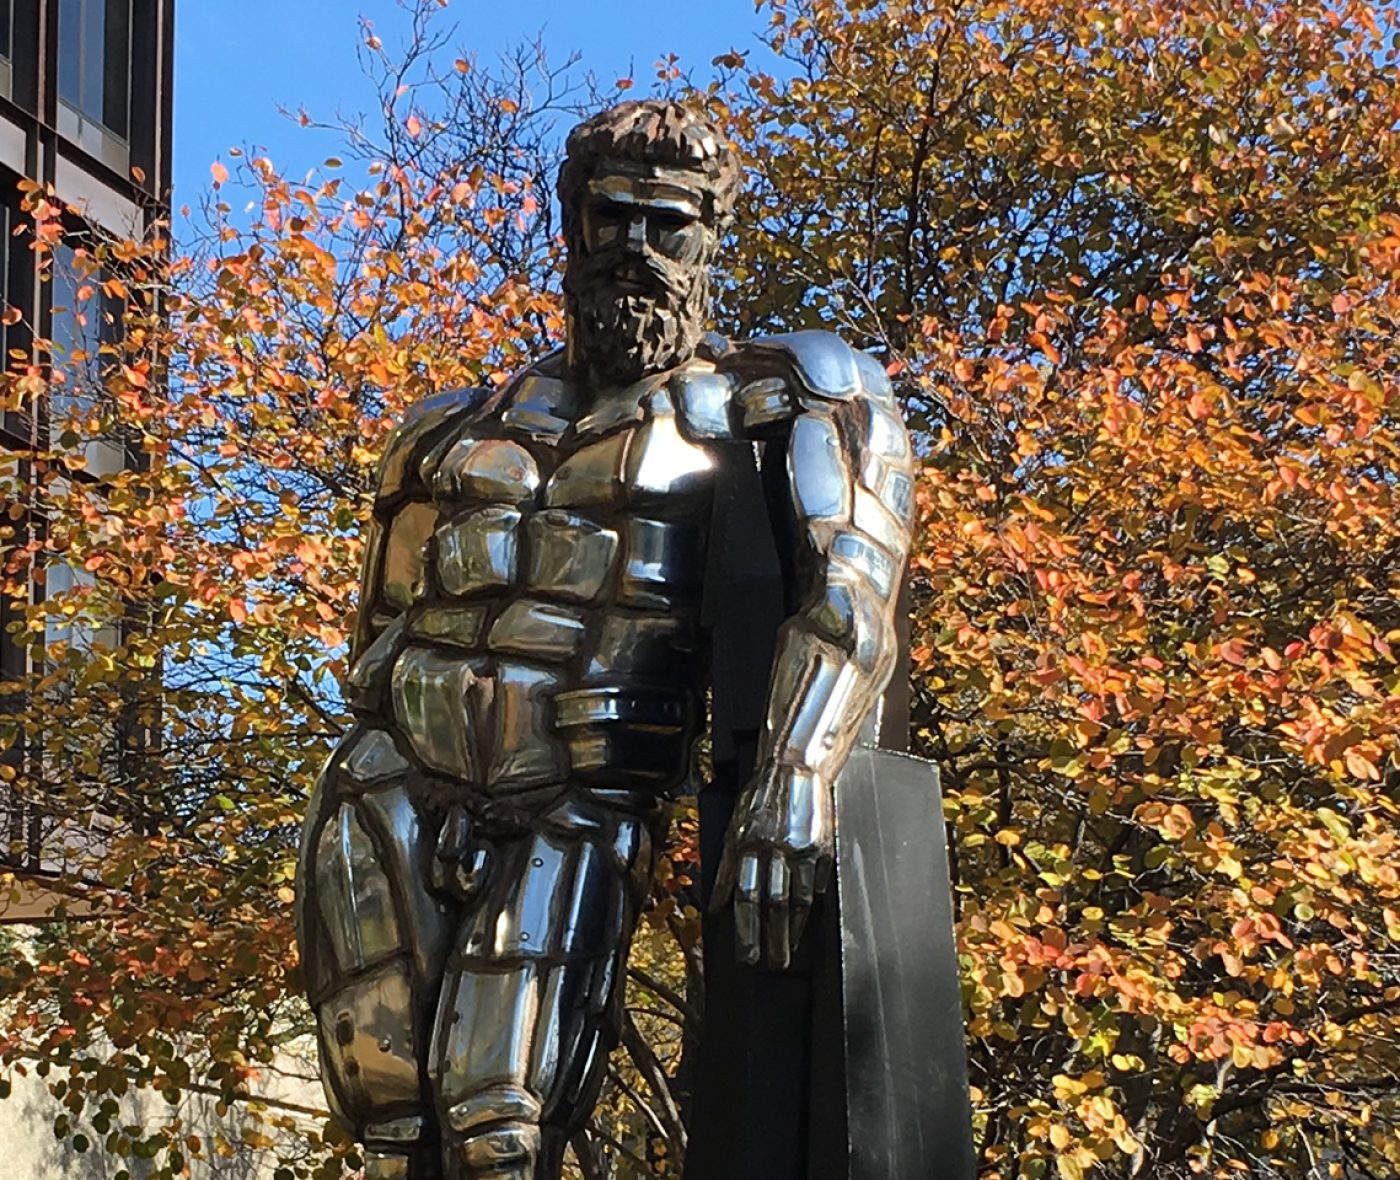 A large statue of a naked man made of chrome is installed between buildings and surrounded by autumn trees